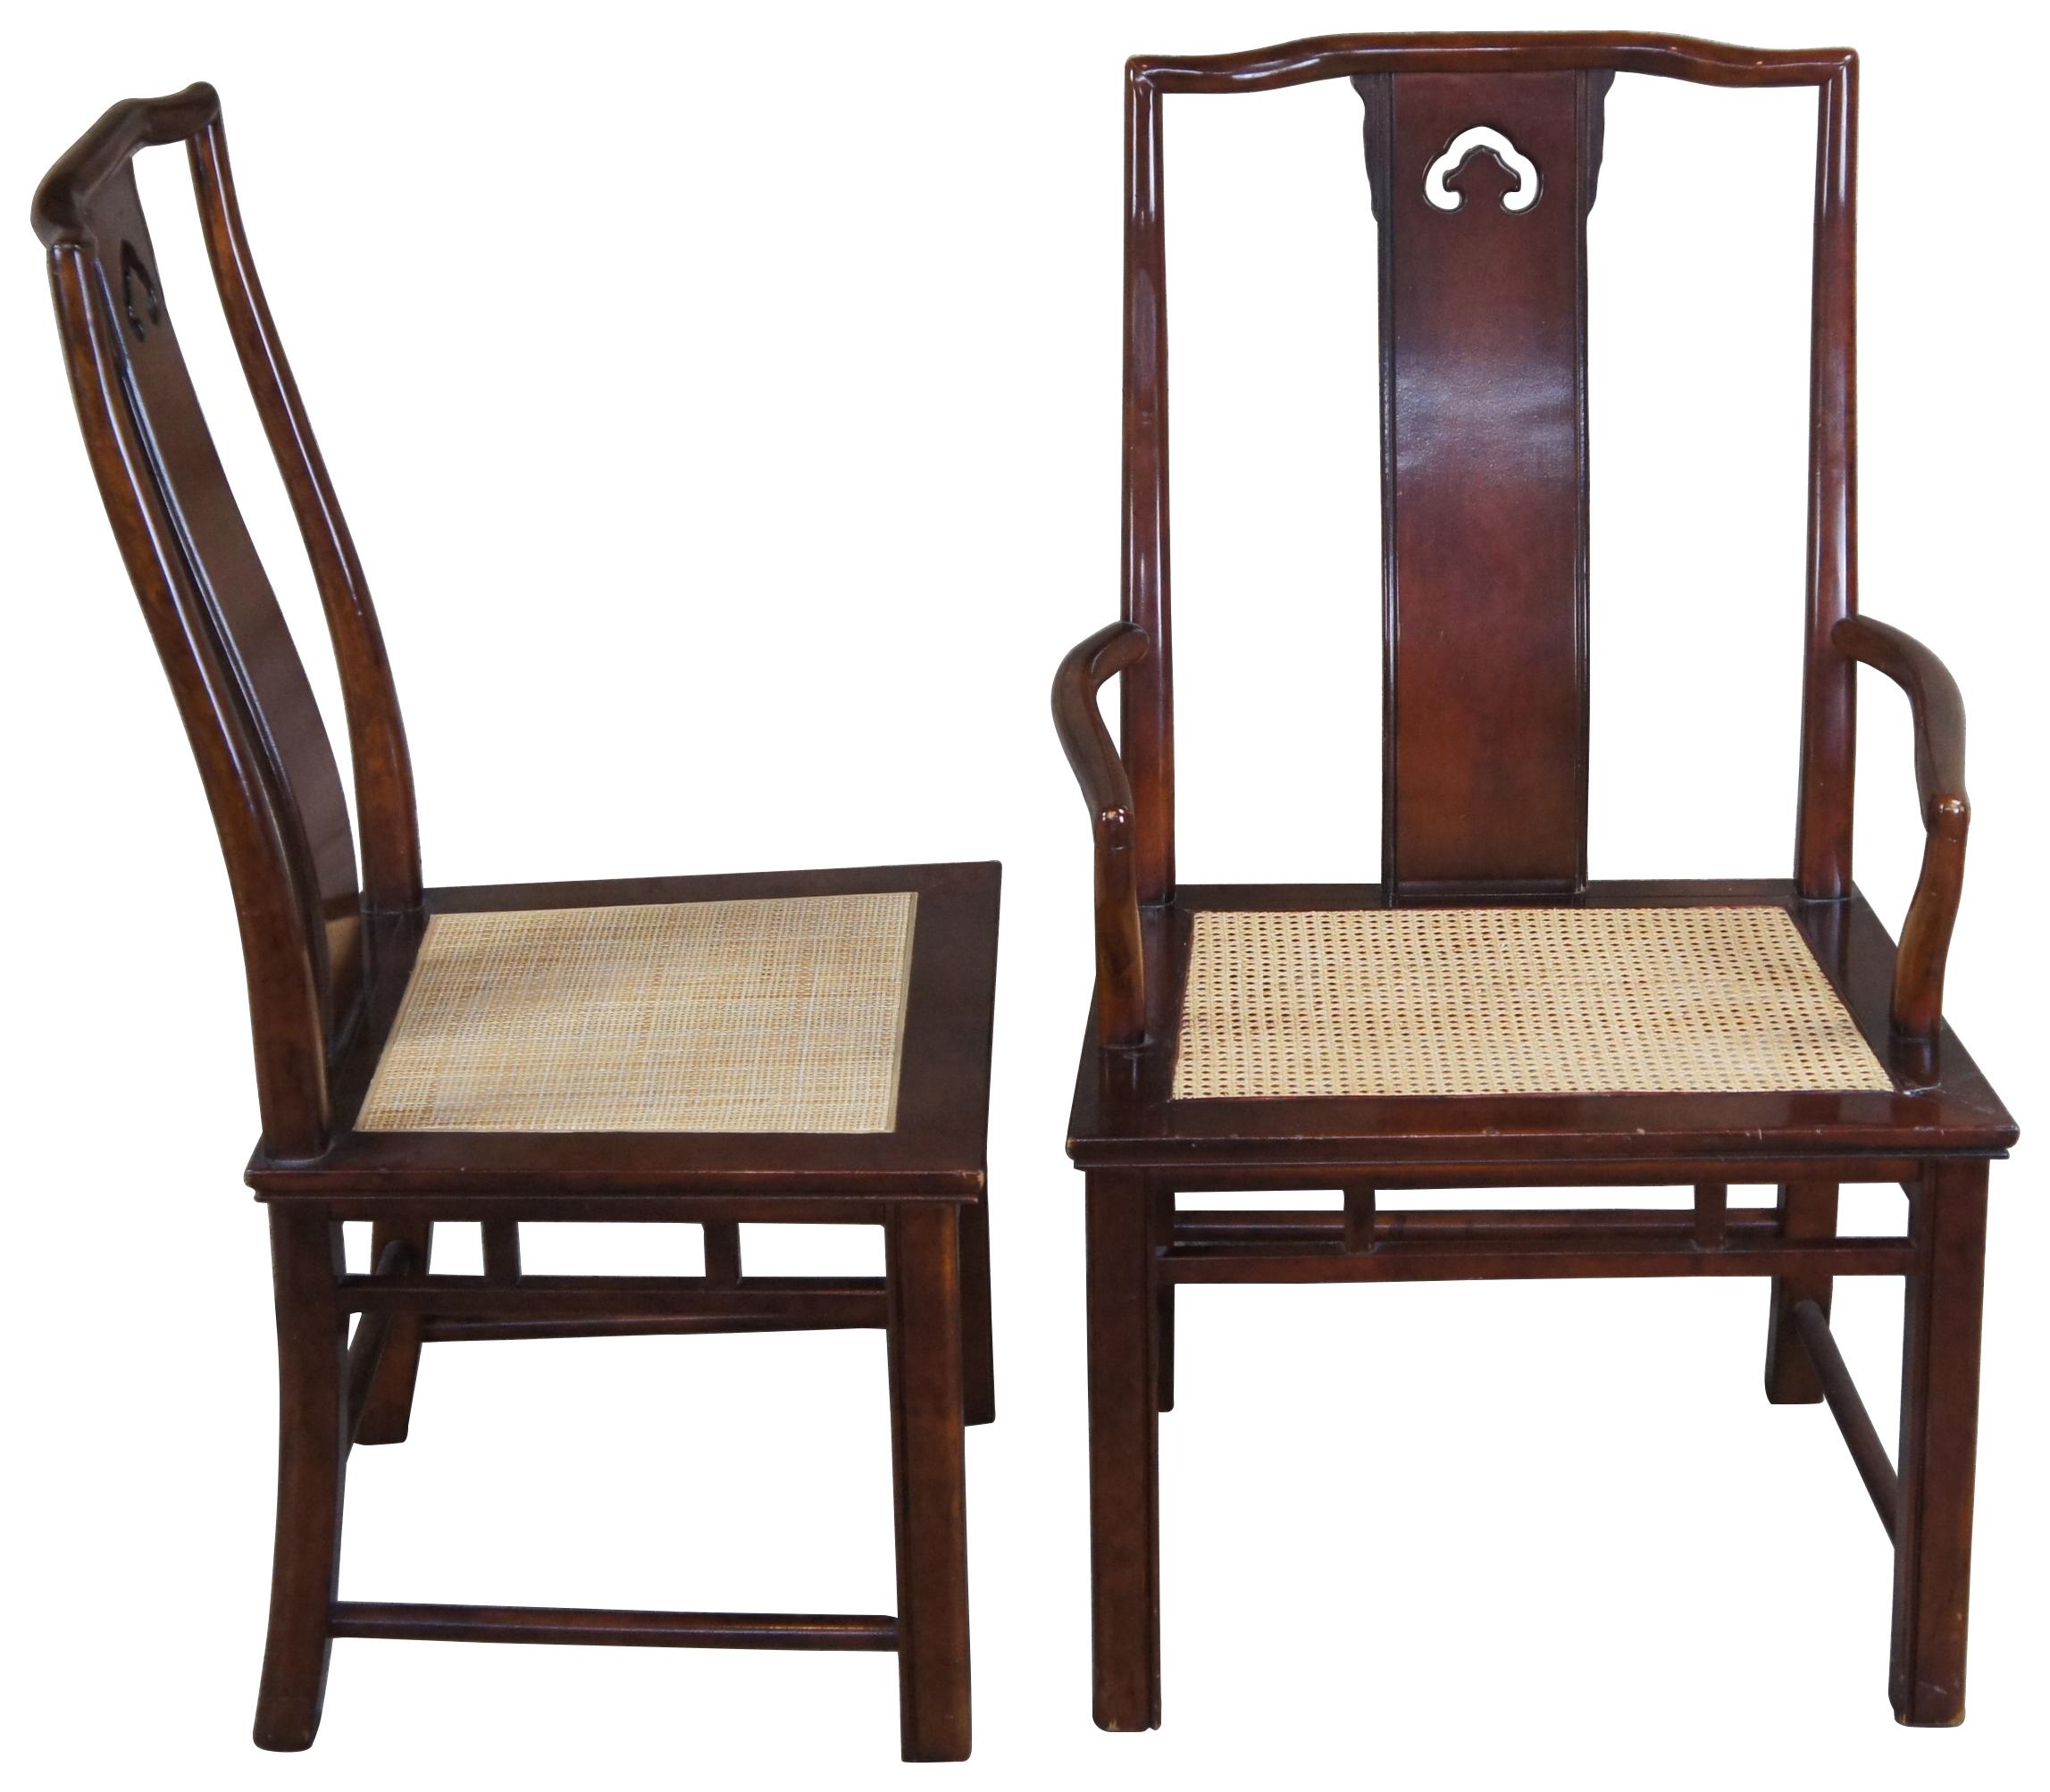 Six vintage 1980s Mandarin dining chairs by White Furniture. Made of mahogany and burl, with Ming style form. Featuring burled and pierced back splat and woven rattan/caned seat.